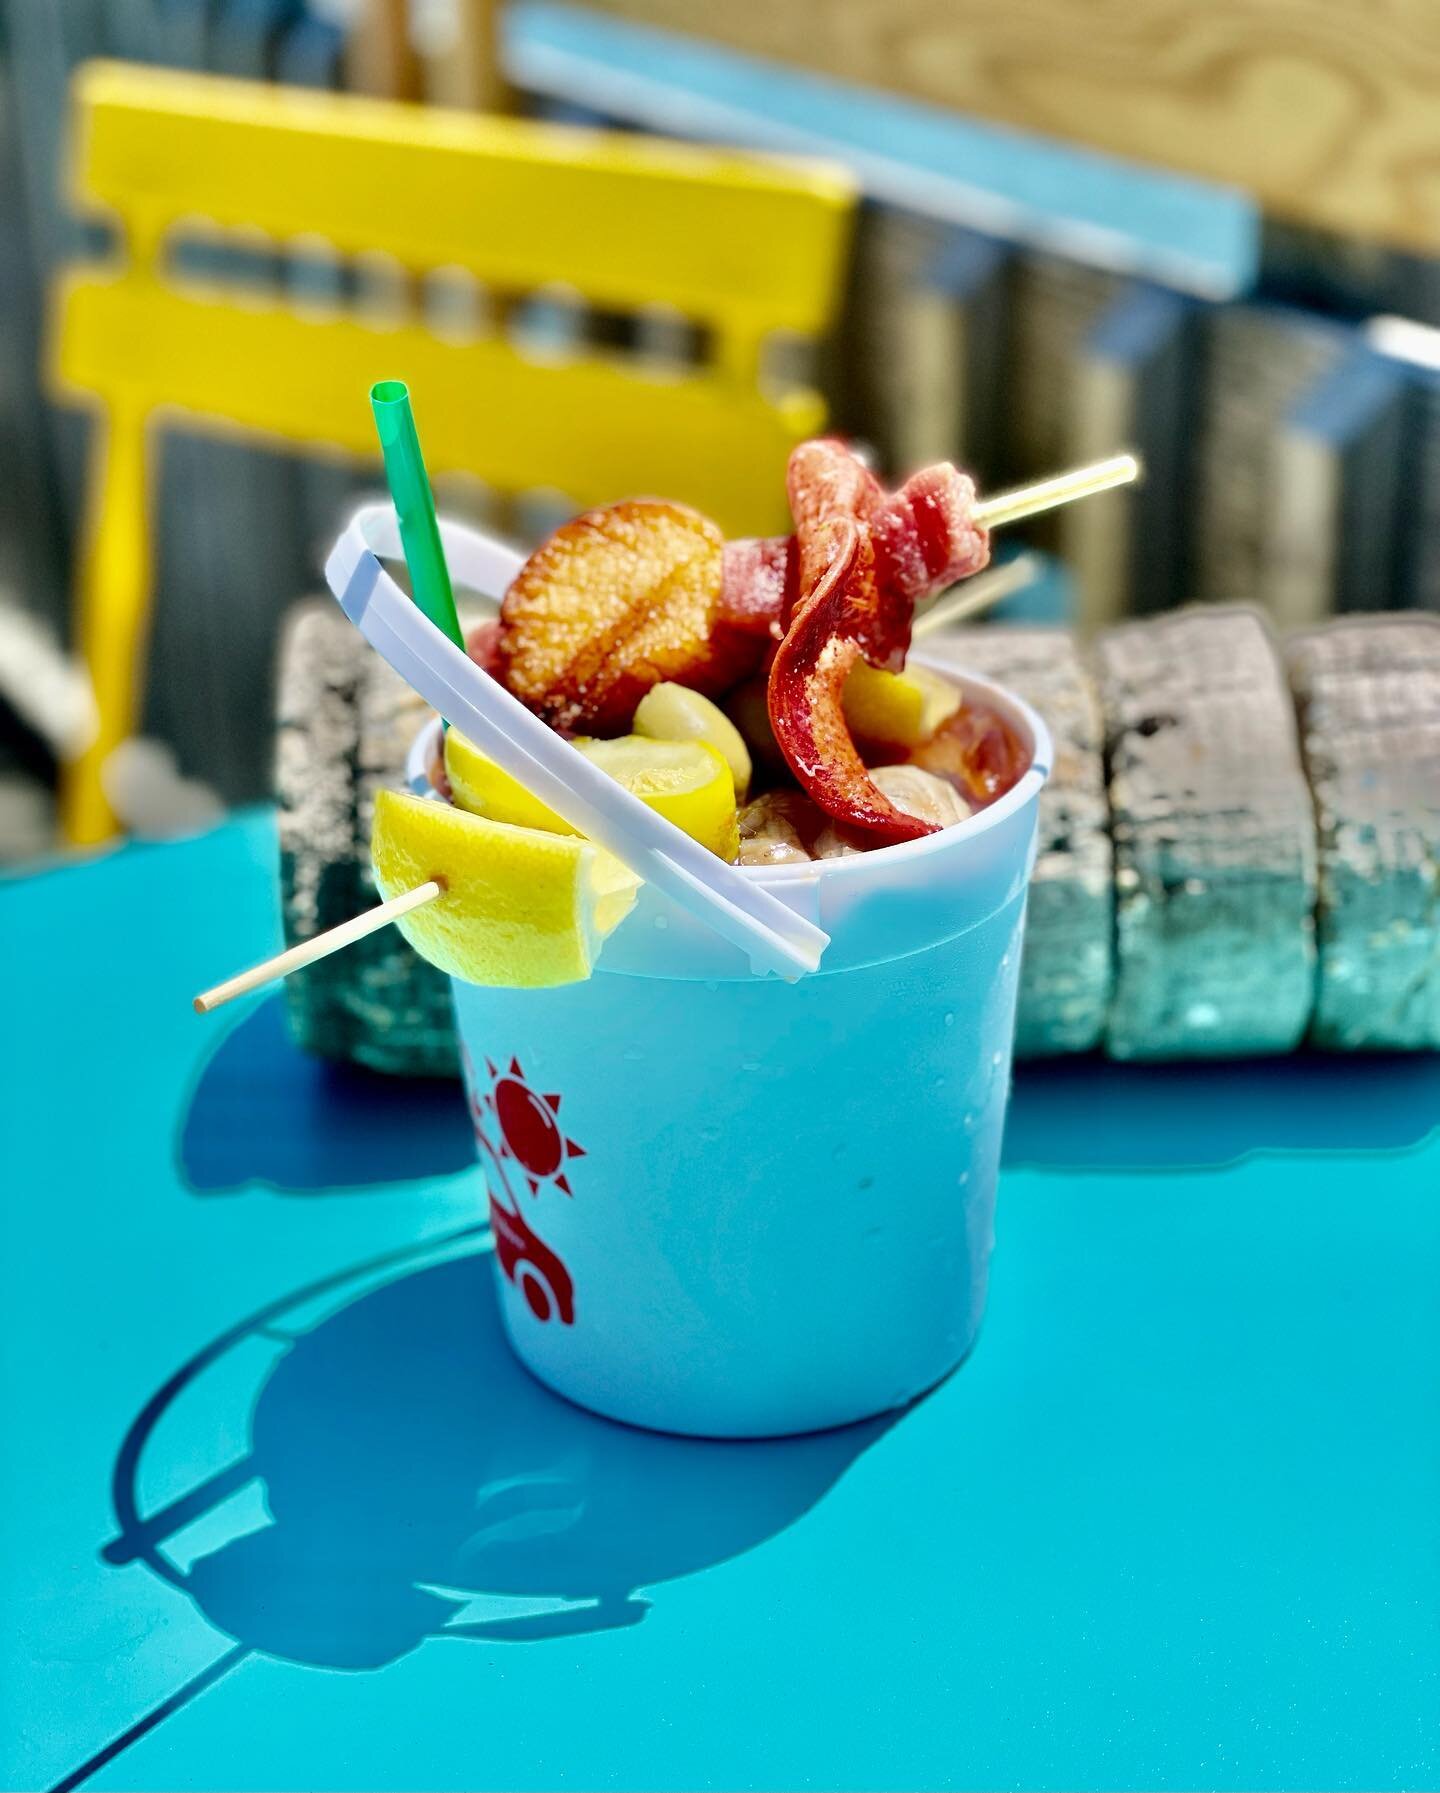 Chum Bucket?!
30 ounce Bloody with Tito&rsquo;s, House made Bloody mix and skewer of fresh Seafood!
#vacationland #mainelobster